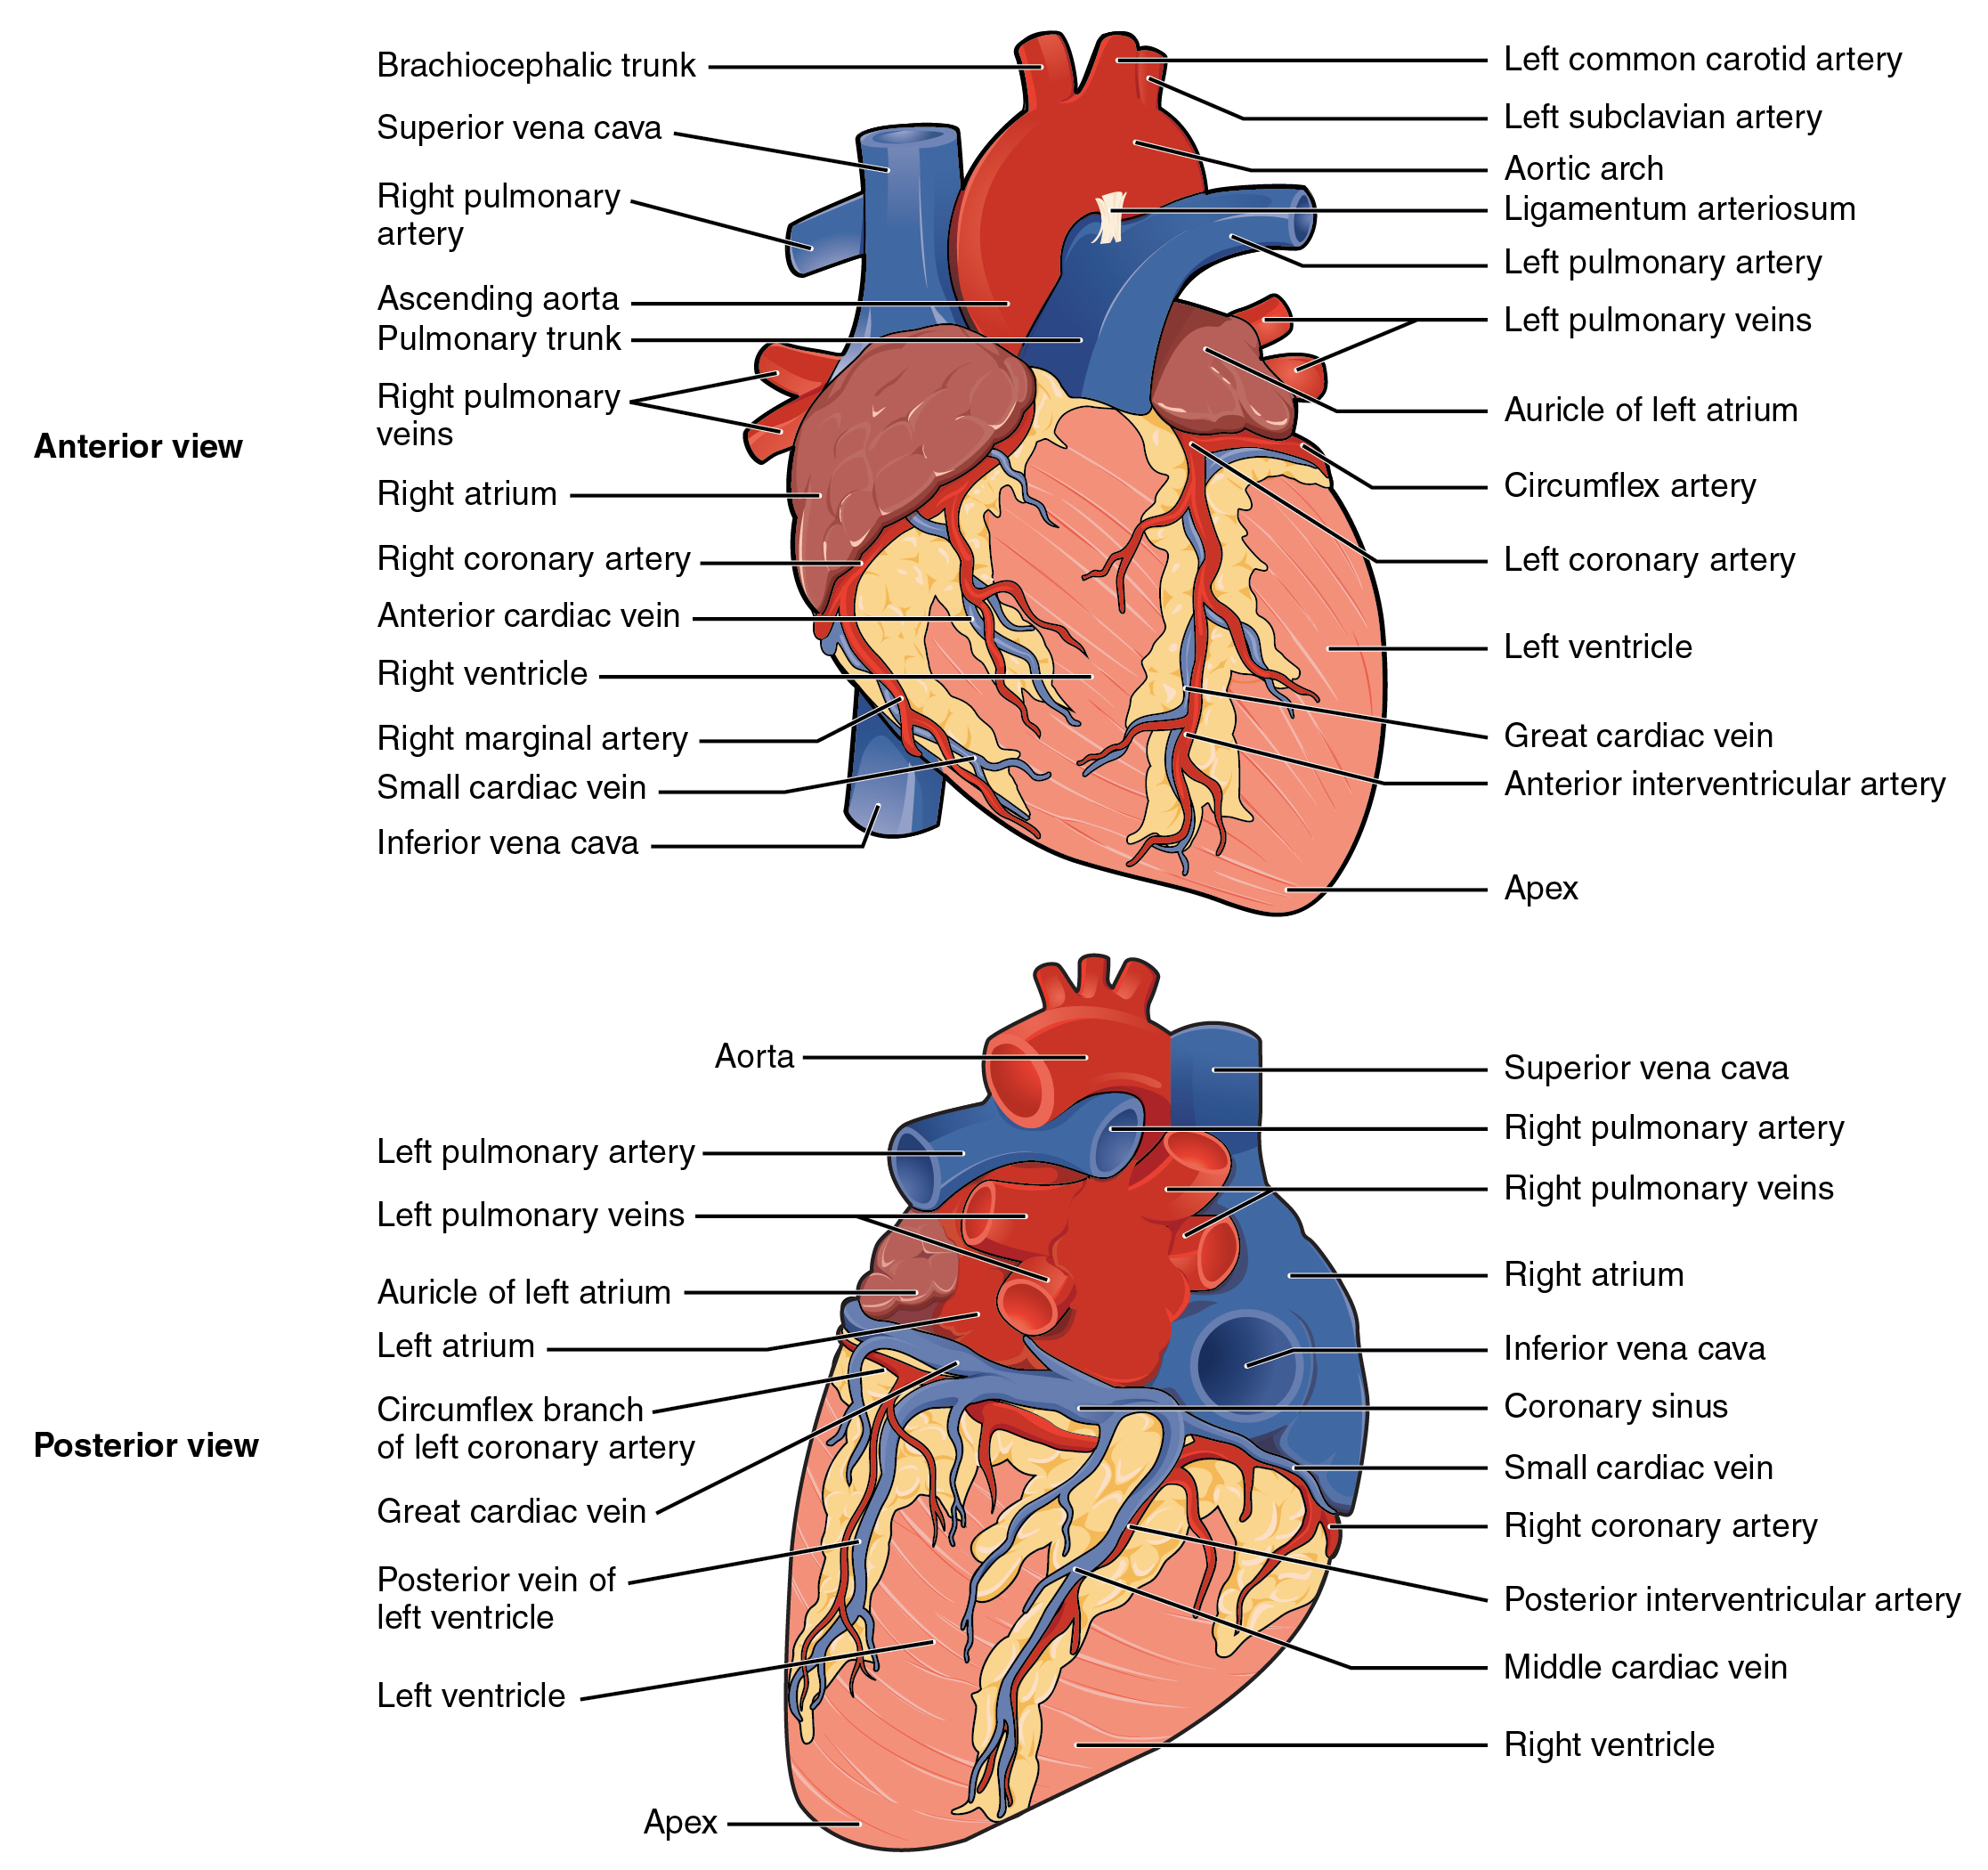 The top panel shows the anterior view of the heart and the bottom panel shows the posterior view of the human heart. In both panels, the main parts of the heart are labeled.